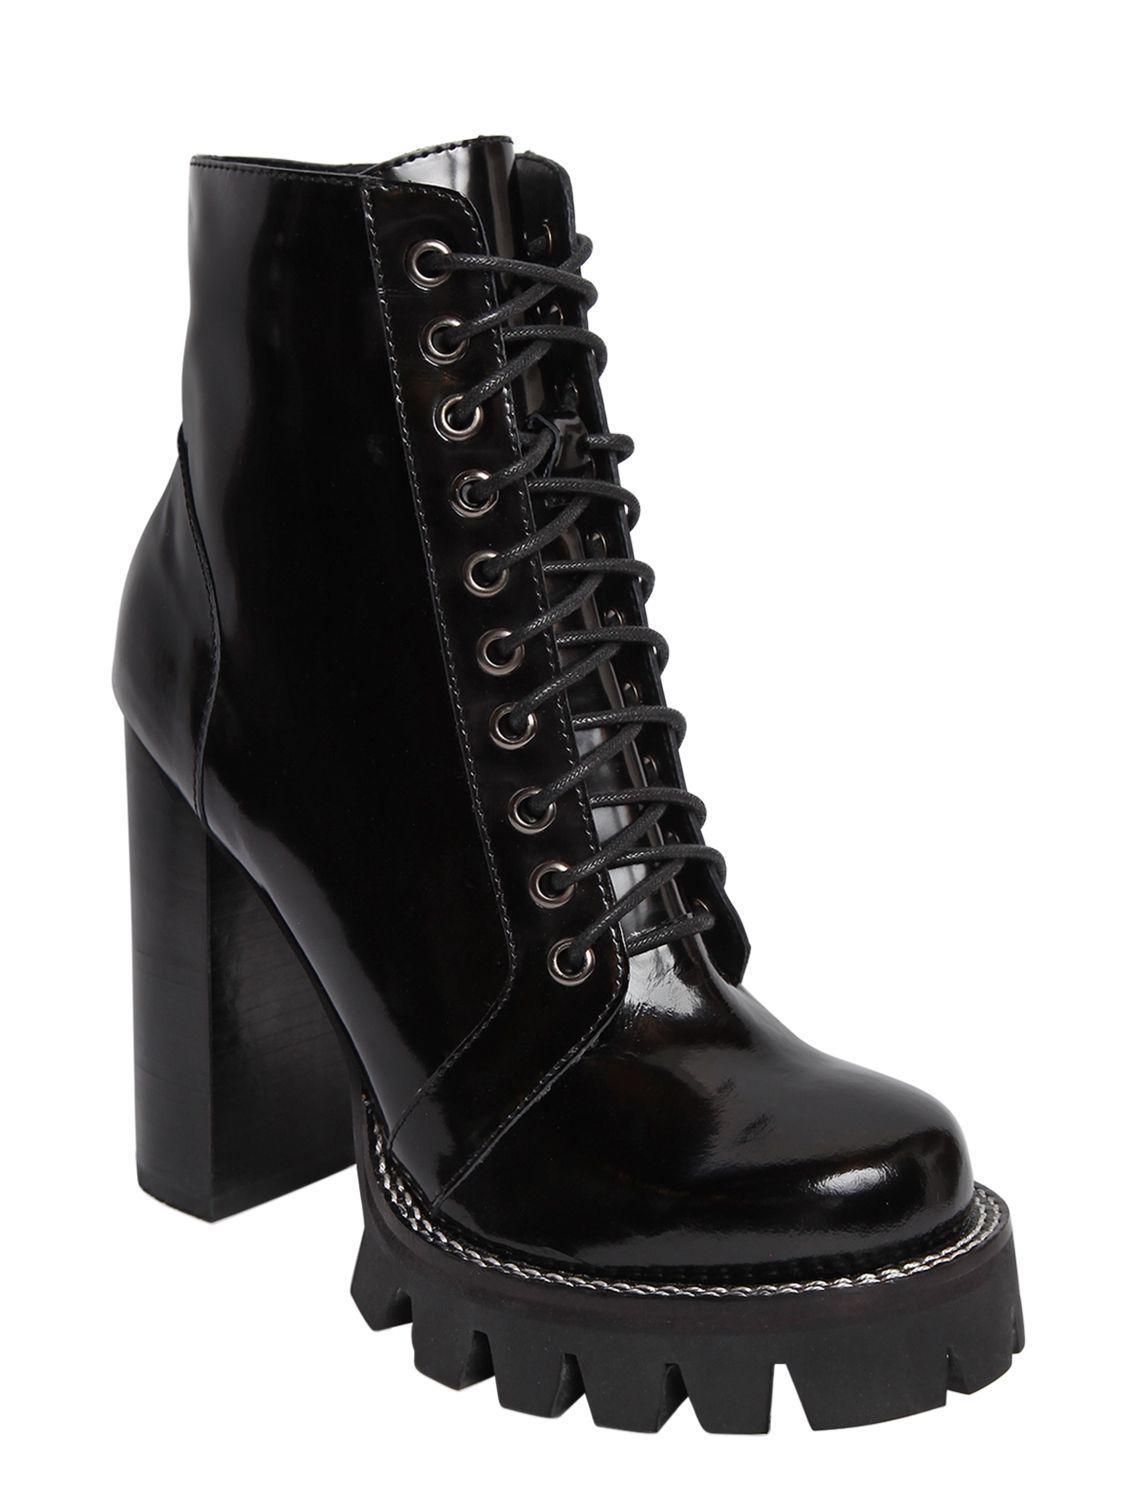 Jeffrey Campbell Legion Ii Brushed Leather Boots in Black - Lyst